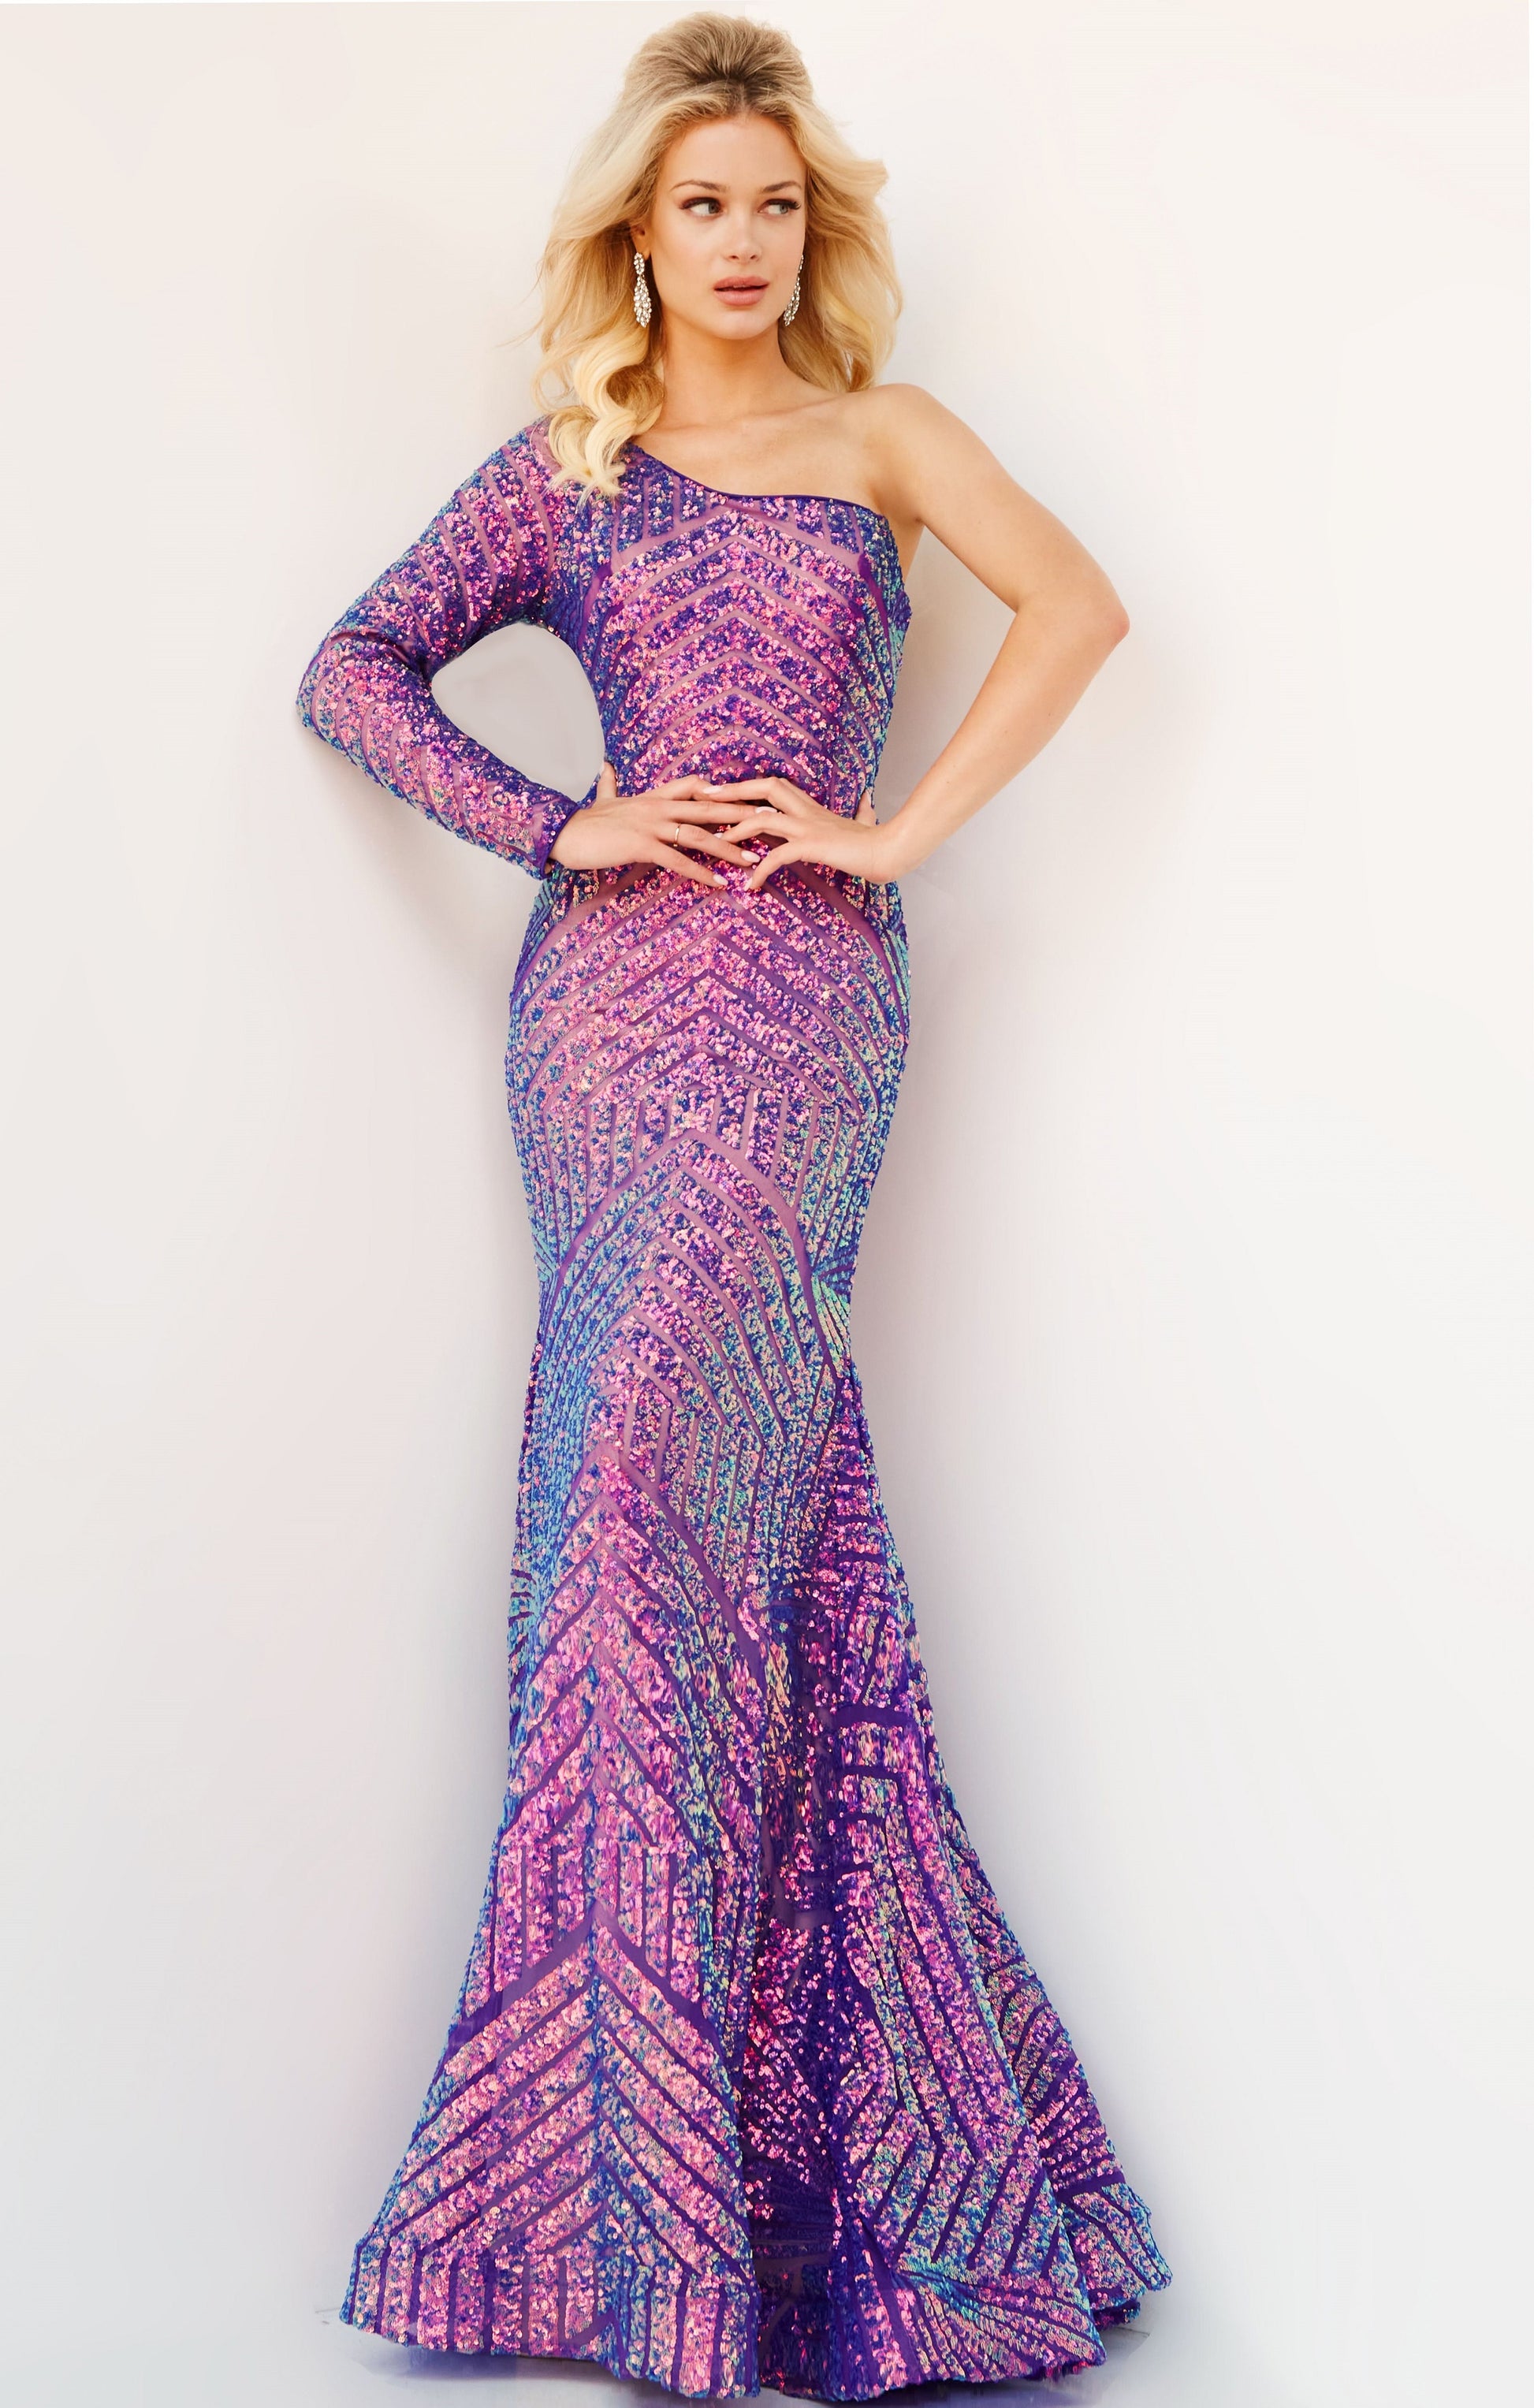 Jovani 24098 One Shoulder Long Sleeve Fitted Sequin Mermaid Prom Dress Pageant Gown Jovani 24098 is the perfect choice for a special occasion. It features a one-shoulder neckline, long sleeves, and a mermaid silhouette adorned with fantasy sequins. This fitted gown is designed to flatter, making you look and feel amazing.  Sizes: 00-24  Colors: EMERALD, IREDENSCNT BLUE, IRIDESCENT VIOLET, NEON HOTPINK, PEACOCK